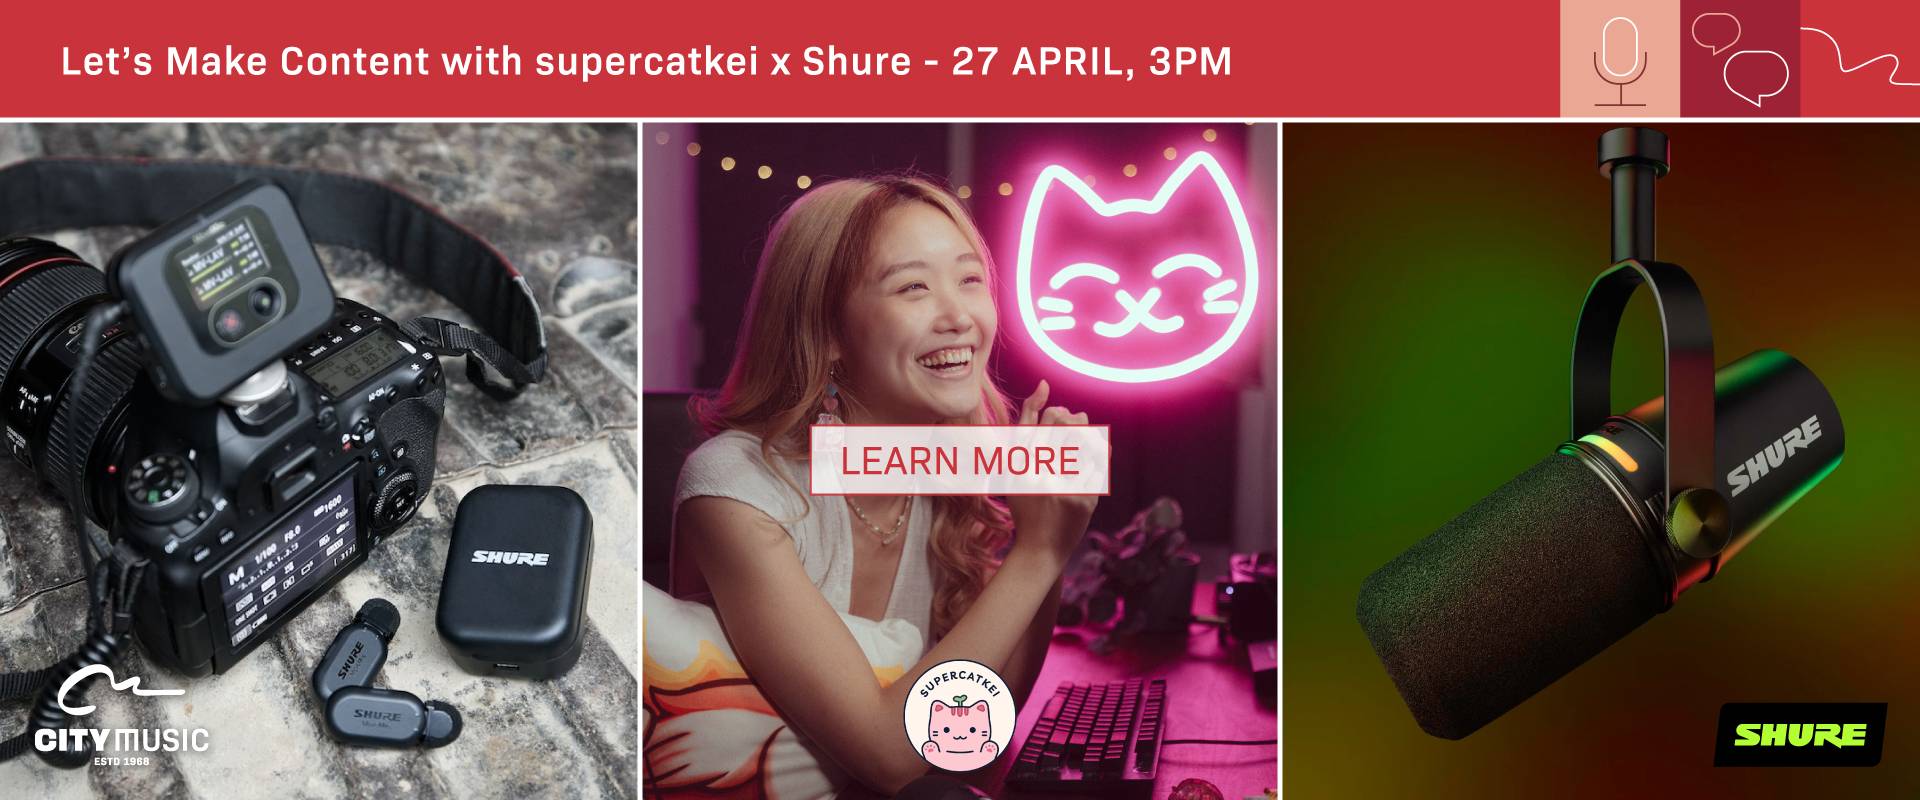 Let's Make Content with supercatkei x Shure